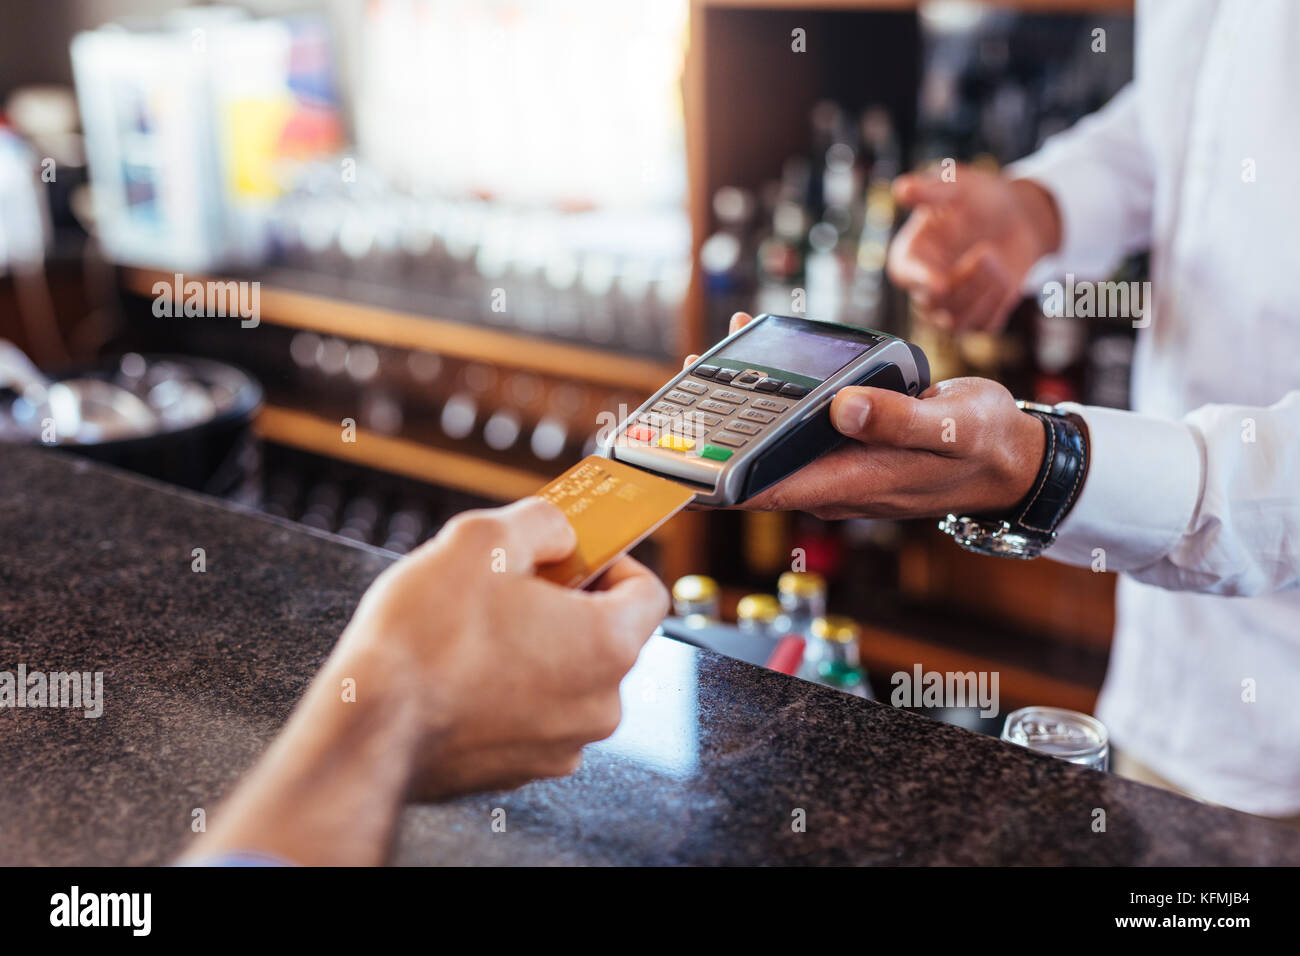 Customer making payment using credit card. Close up of card payment being made between customer and bartender in cafe. Stock Photo